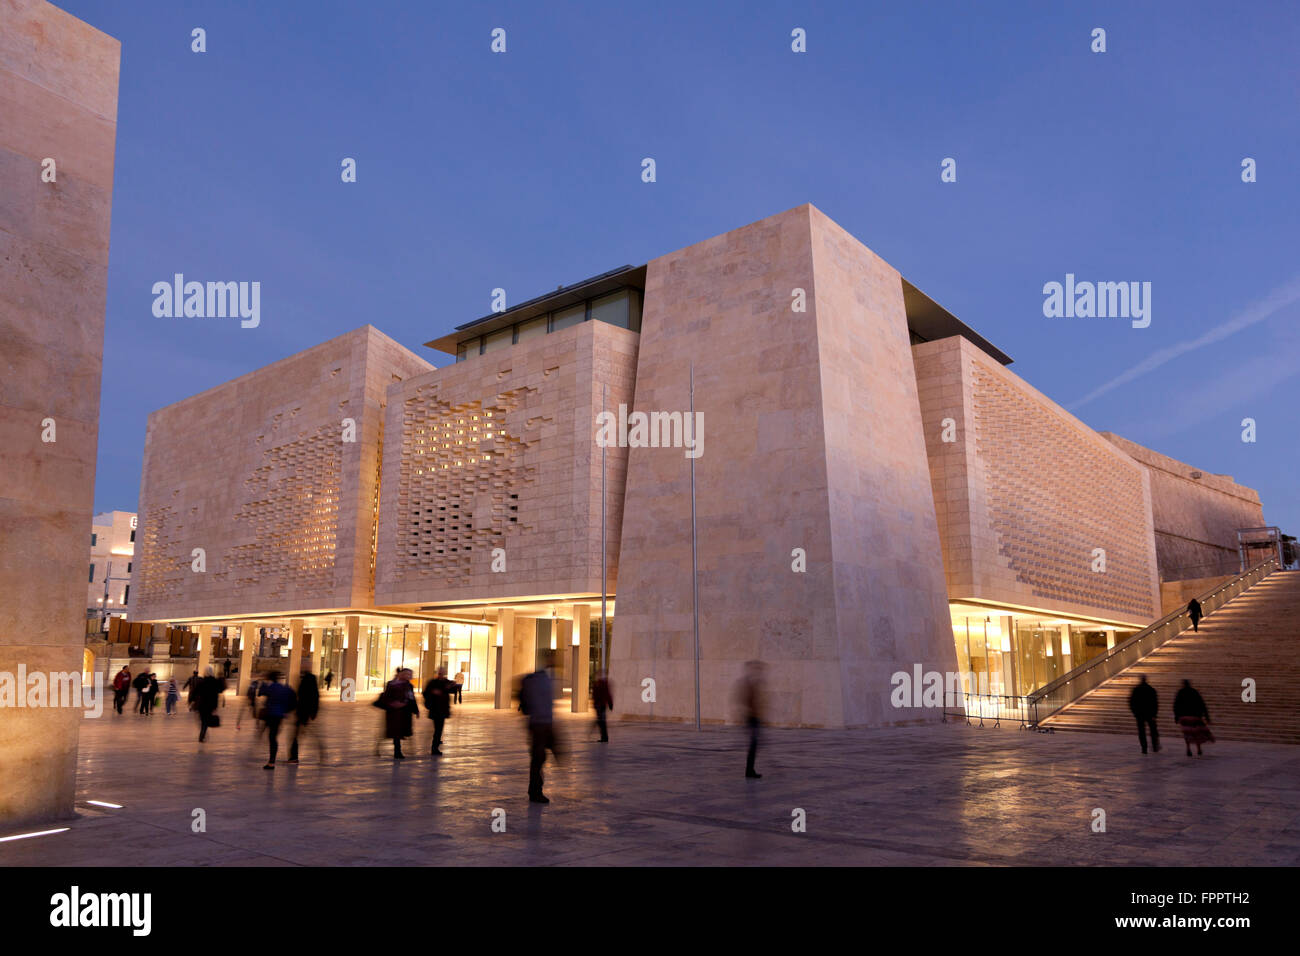 The new parliament building is the main element of a stupendous architectural setpiece in Valletta inaugurated in 2015. Stock Photo